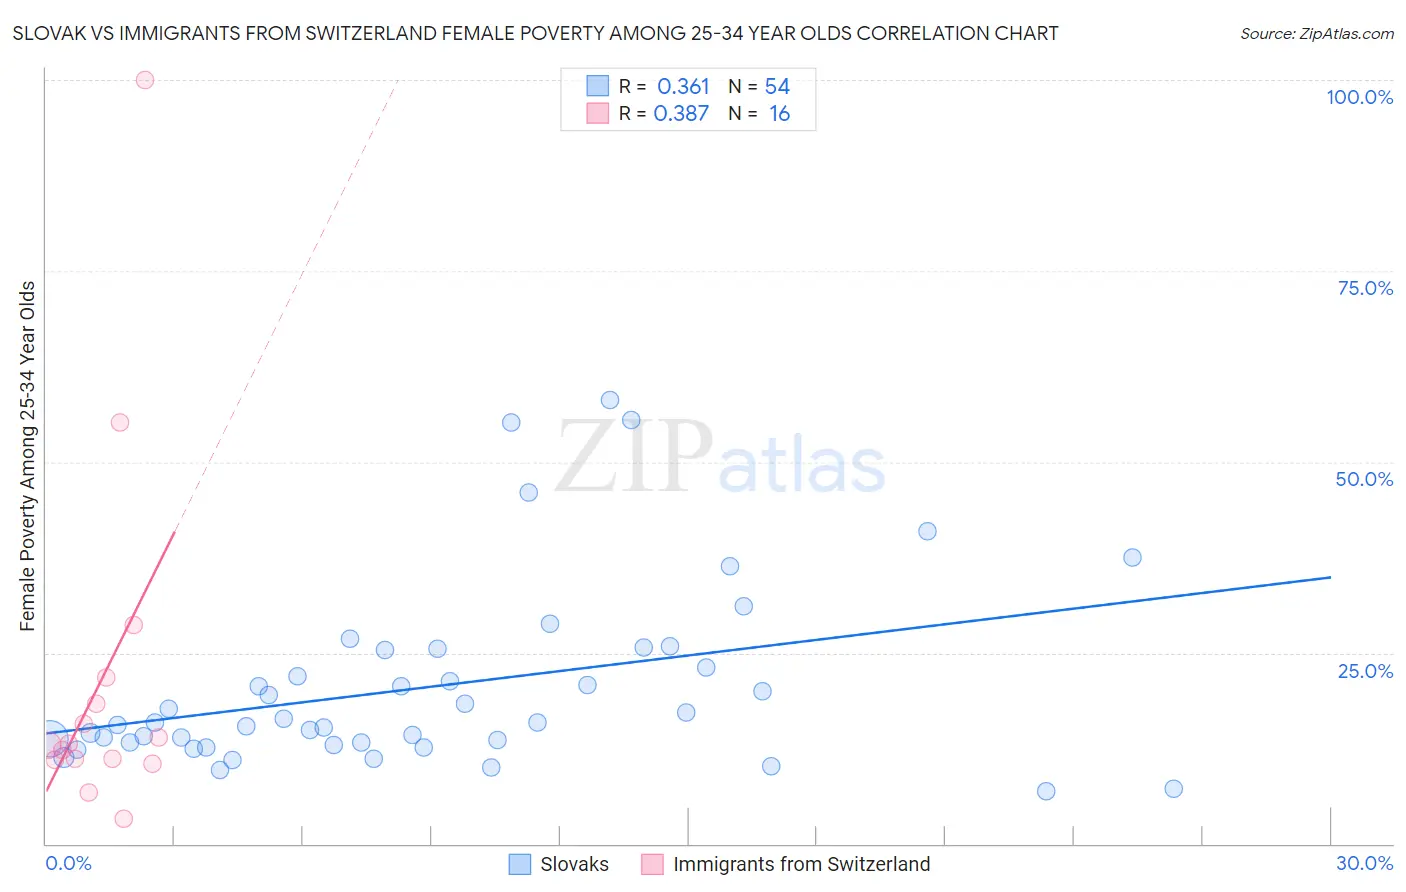 Slovak vs Immigrants from Switzerland Female Poverty Among 25-34 Year Olds